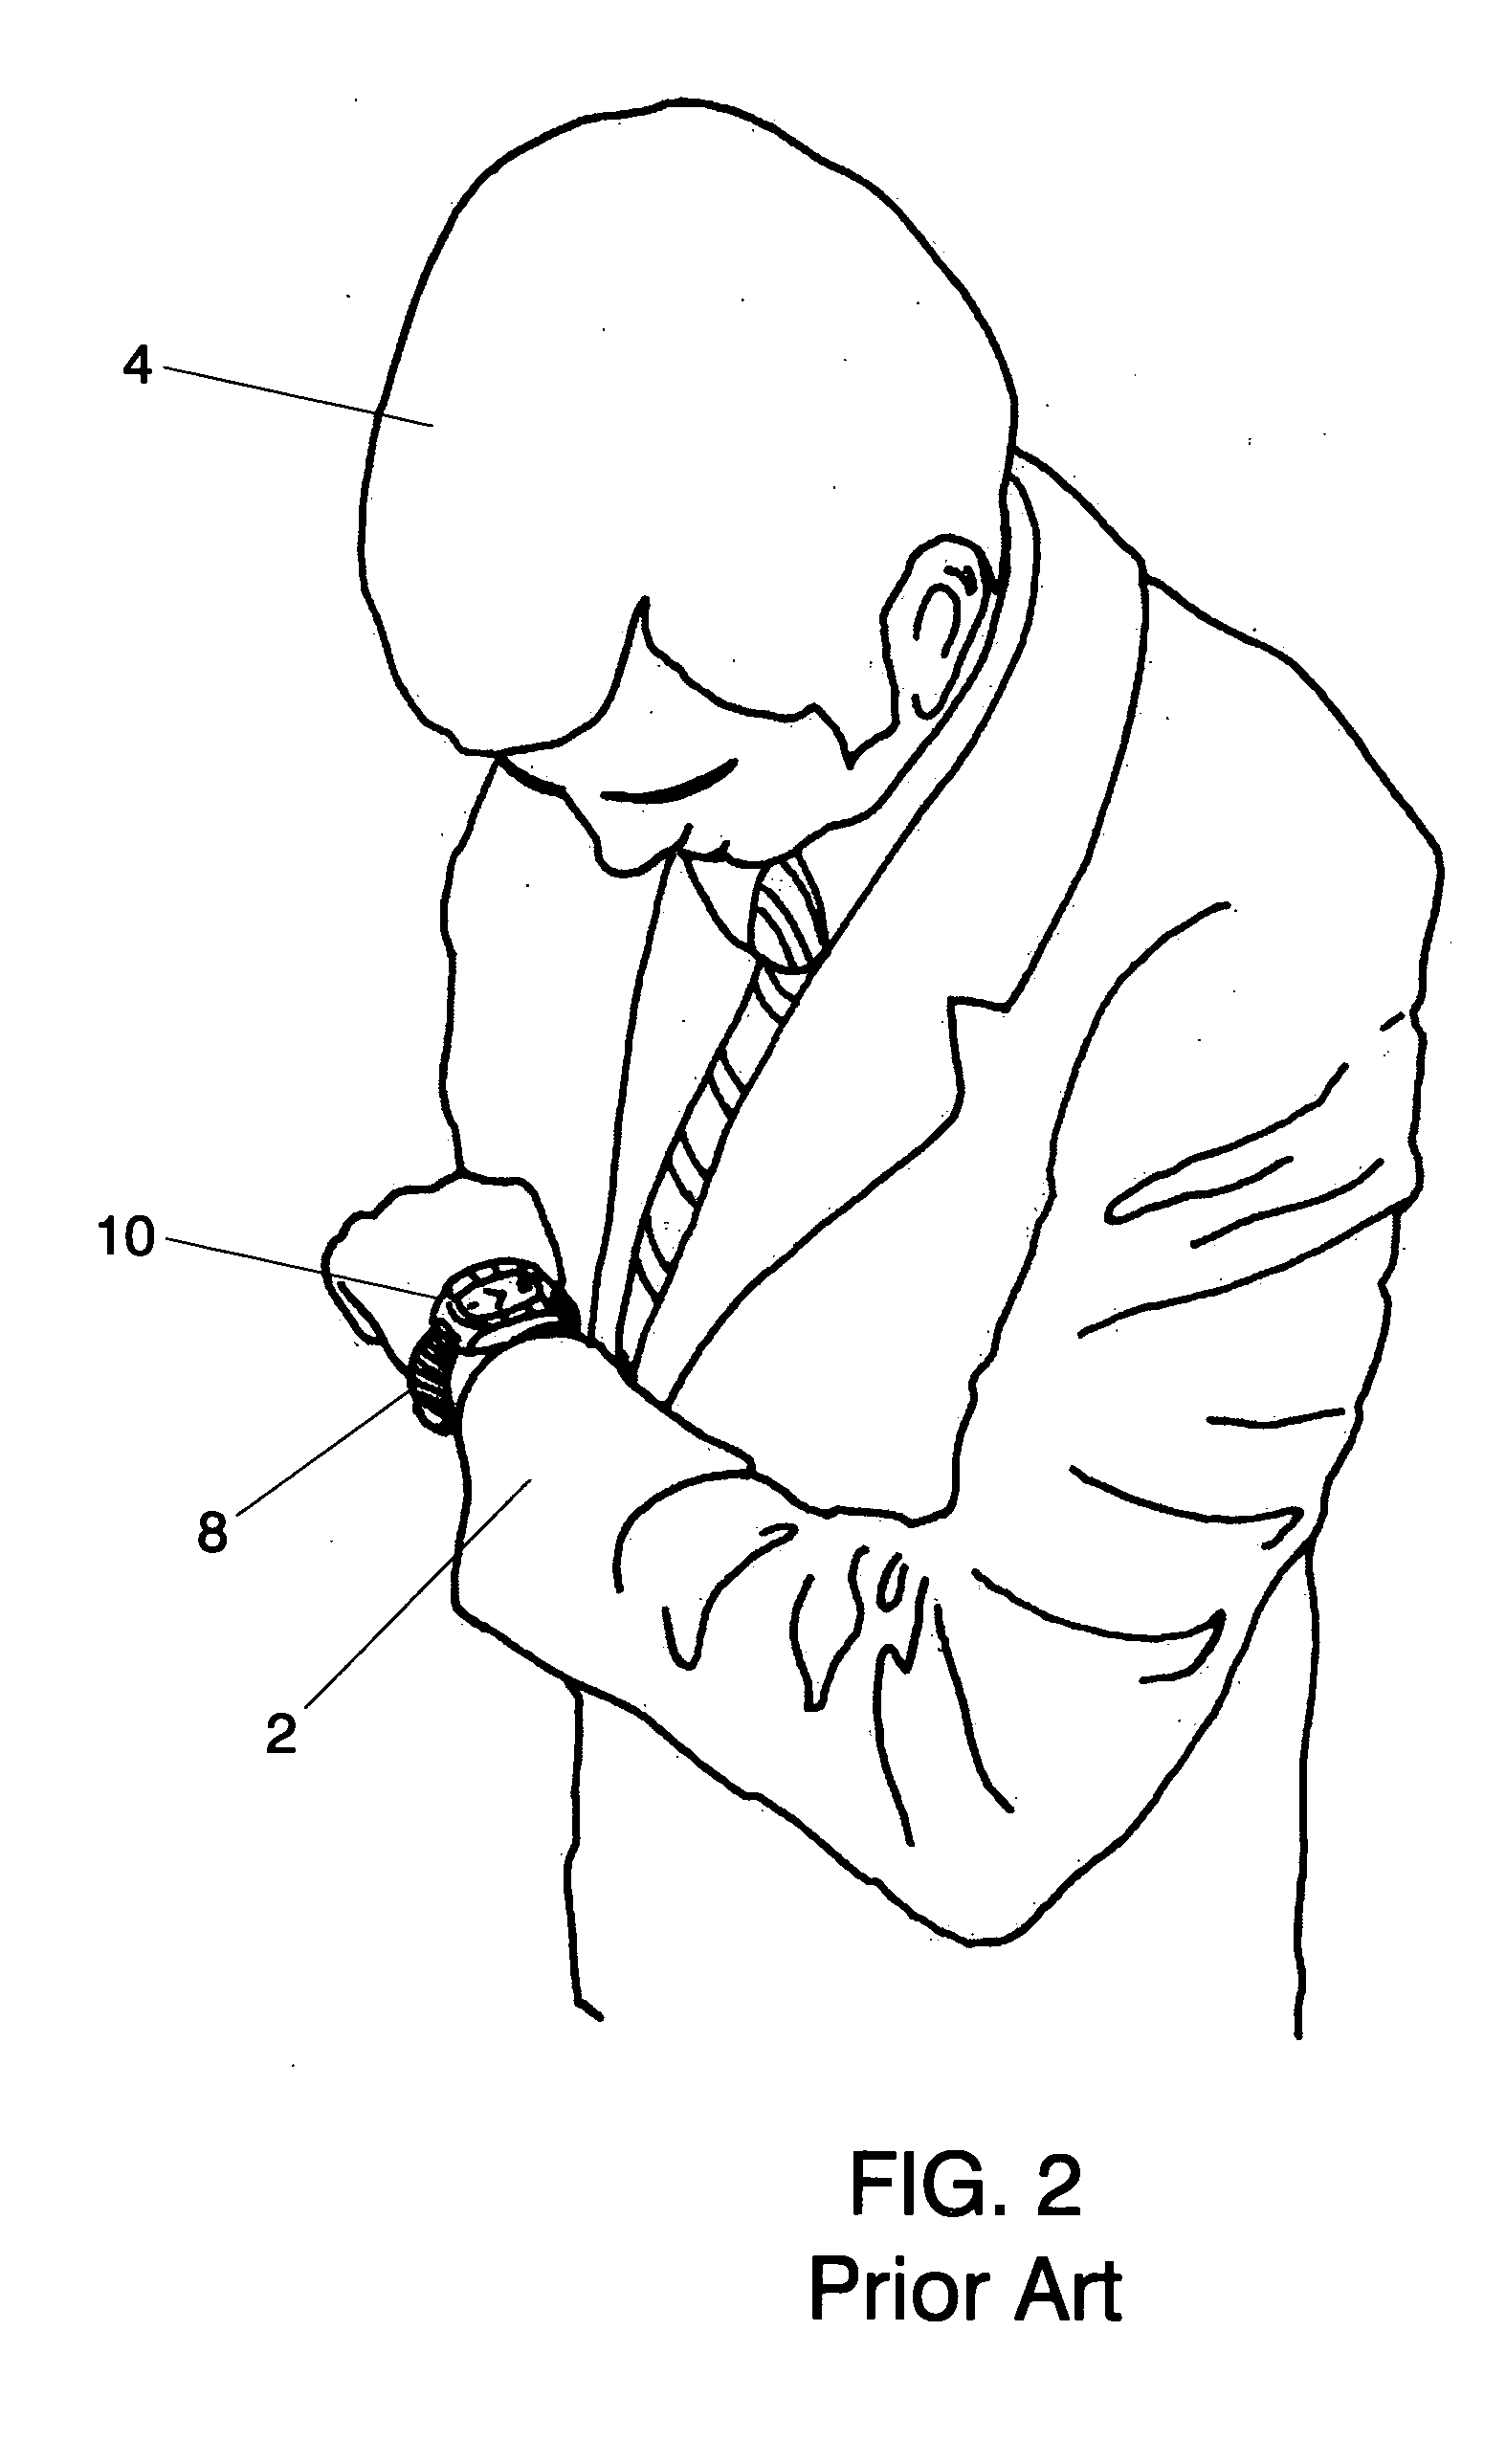 More efficient display and control for wearable sports instrumentation